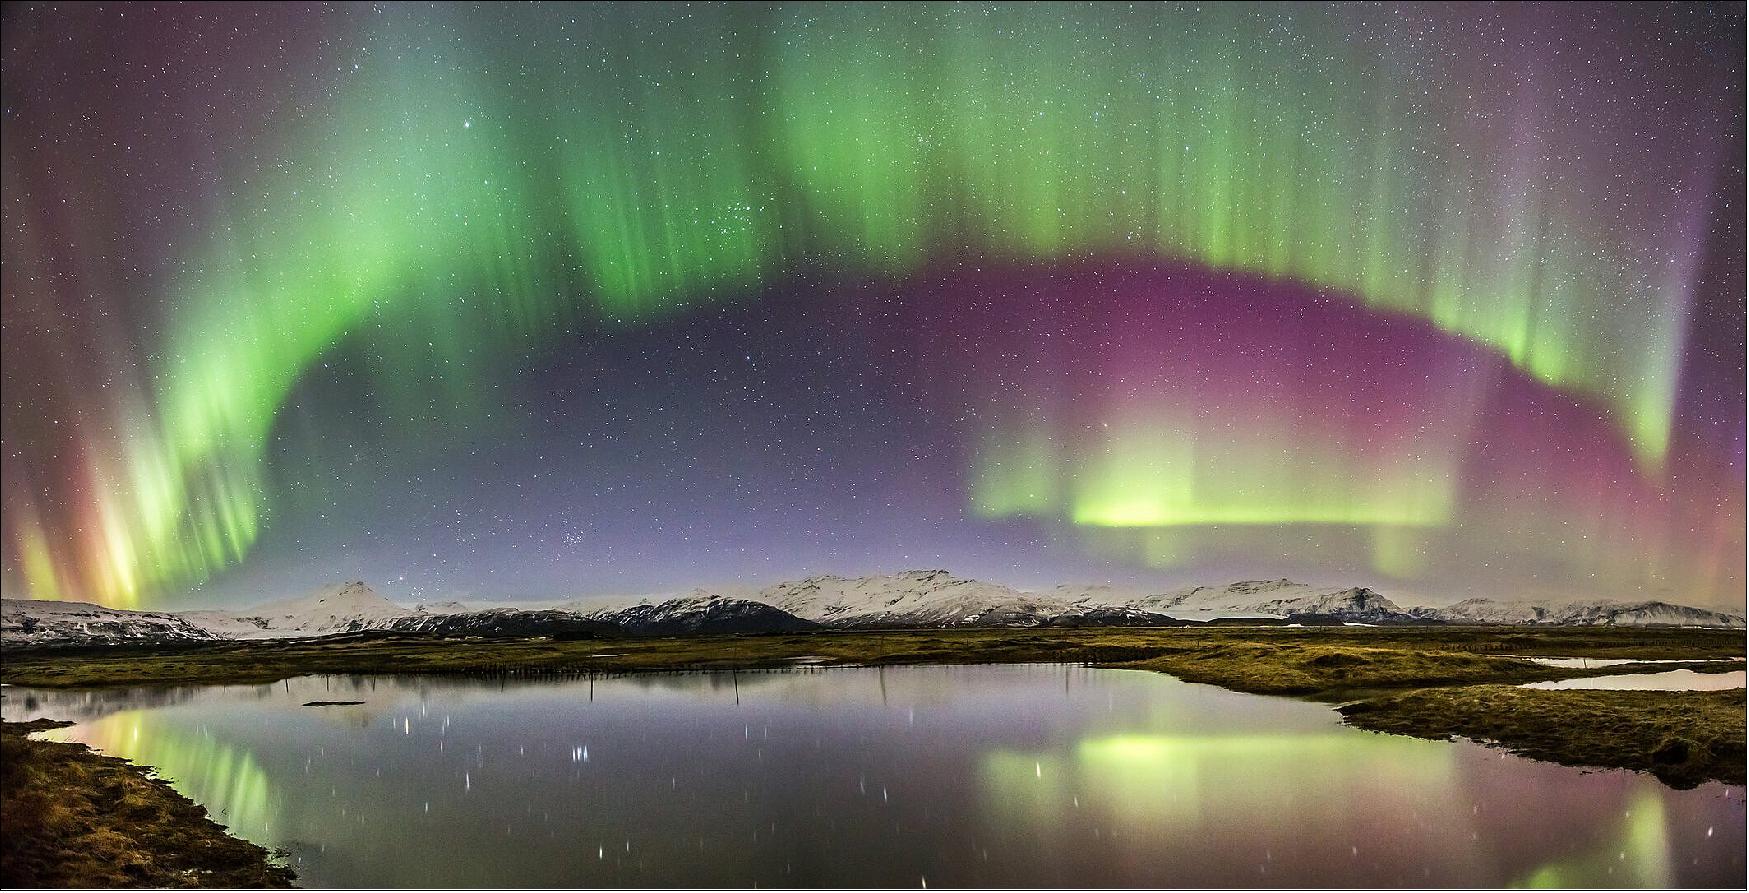 Figure 14: Aurora over Icelandic lake. This dramatic panorama shows a colorful, shimmering auroral curtain reflected in a placid Icelandic lake. The image was taken on 18 March 2015 by Carlos Gauna, near Jökulsárlón Glacier Lagoon in southern Iceland. The celestial display was generated by a coronal mass ejection, or CME, on 15 March. Sweeping across the inner Solar System at some 3 million km per hour, the eruption reached Earth, 150 million kilometers away, in only two days. The gaseous cloud collided with Earth's magnetic field at around 04:30 GMT on 17 March. - When the charged particles from the Sun penetrate Earth's magnetic shield, they are channelled downwards along the magnetic field lines until they strike atoms of gas high in the atmosphere. Like a giant fluorescent neon lamp, the interaction with excited oxygen atoms generates a green or, more rarely, red glow in the night sky, while excited nitrogen atoms yield blue and purple colors (photo credit: C. Gauna)